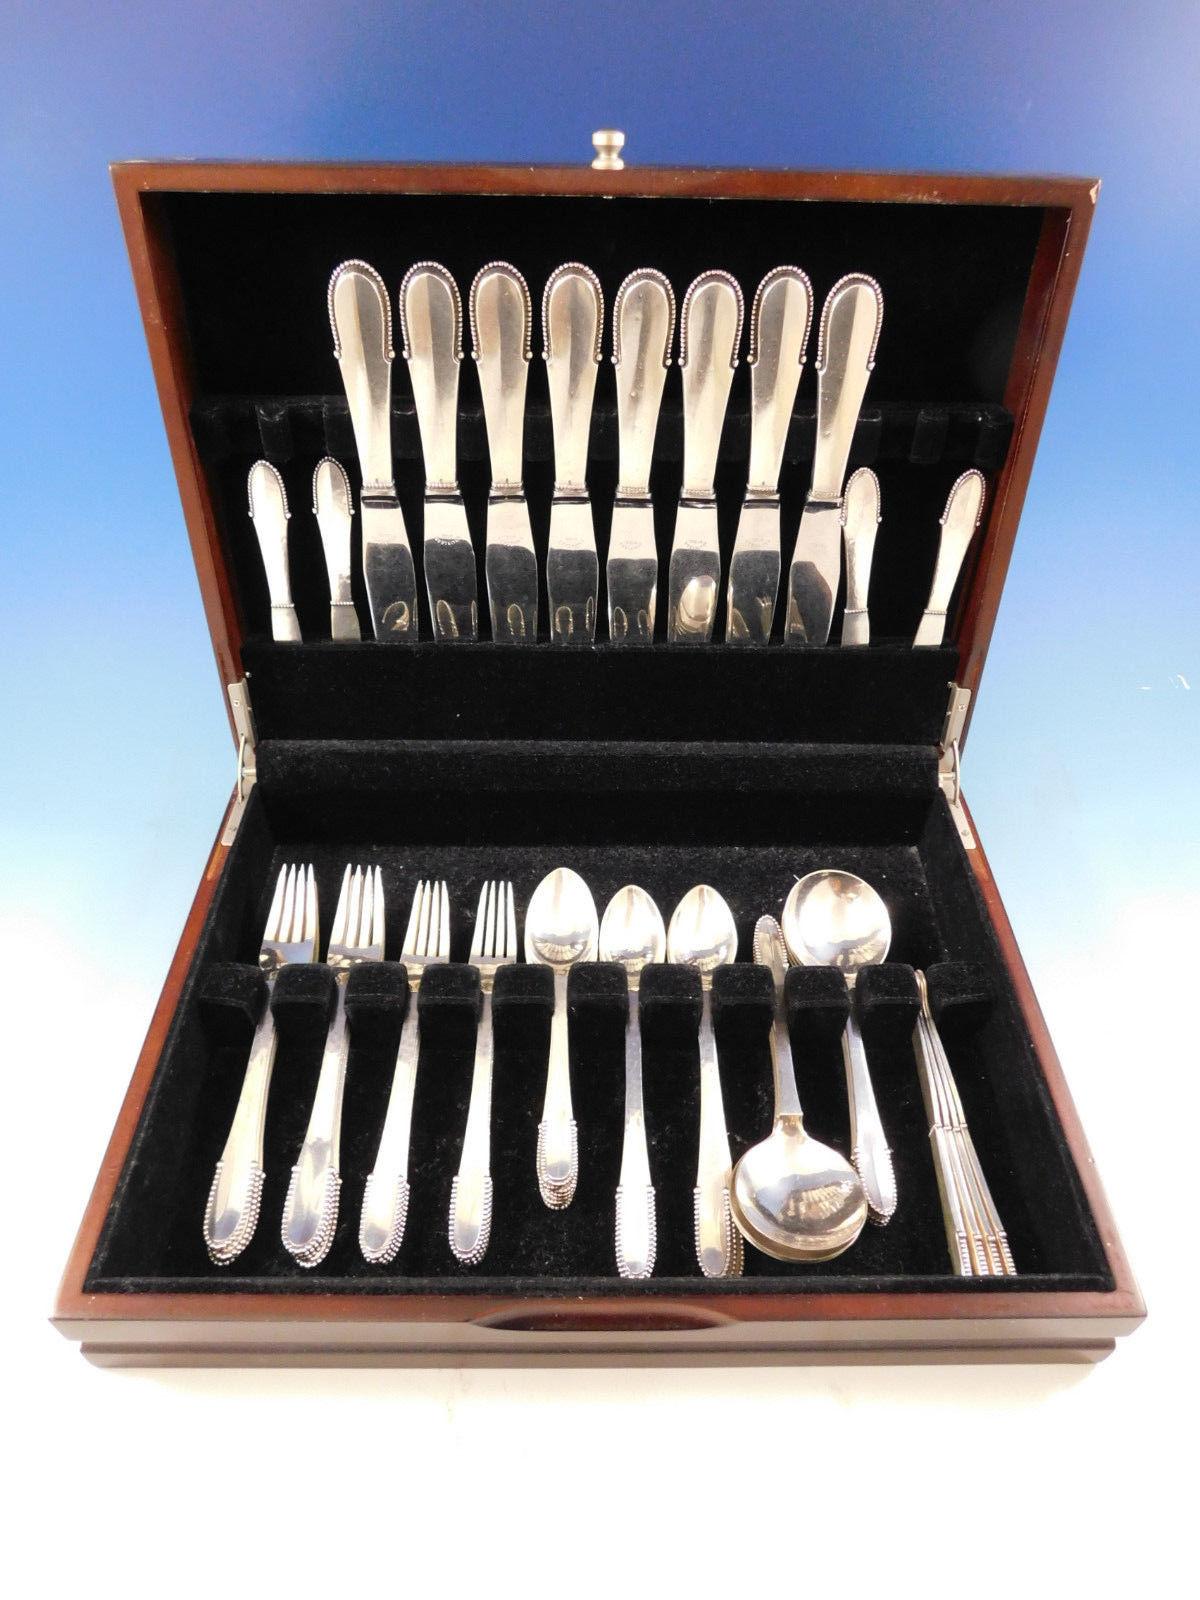 Dinner size beaded by Georg Jensen sterling silver flatware set, 56 pieces. This set includes:

8 dinner size knives, short/wide handles, 8 7/8